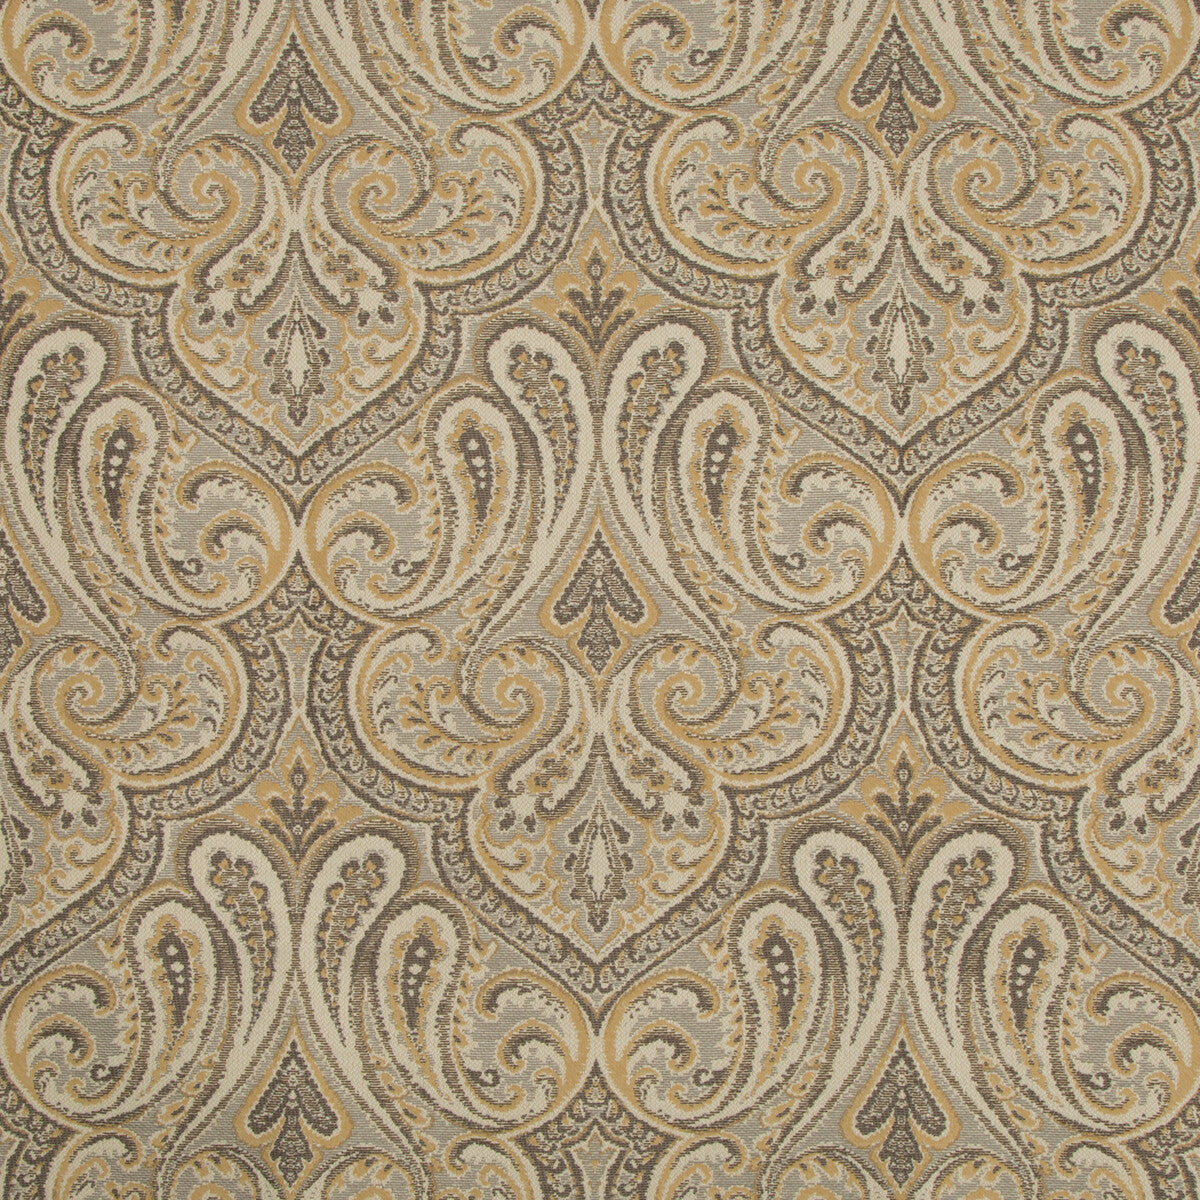 Kravet Contract fabric in 34771-16 color - pattern 34771.16.0 - by Kravet Contract in the Crypton Incase collection